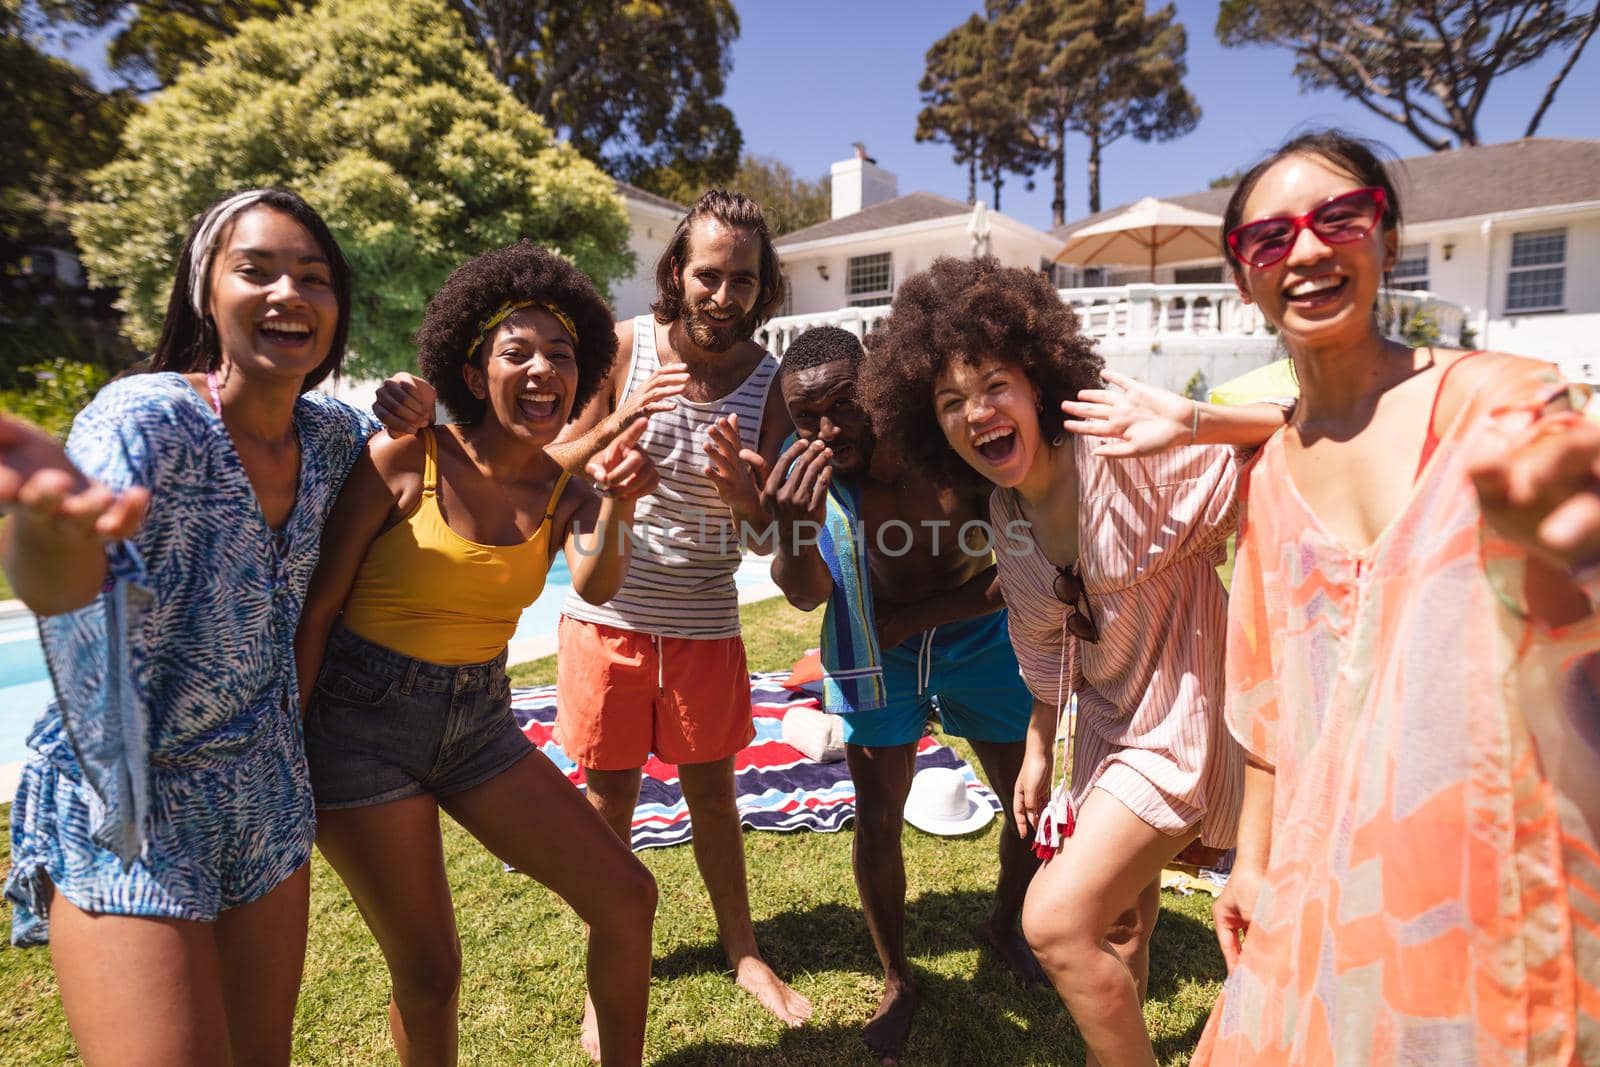 Diverse group of friends having fun and smiling at a pool party. Hanging out and relaxing outdoors in summer.